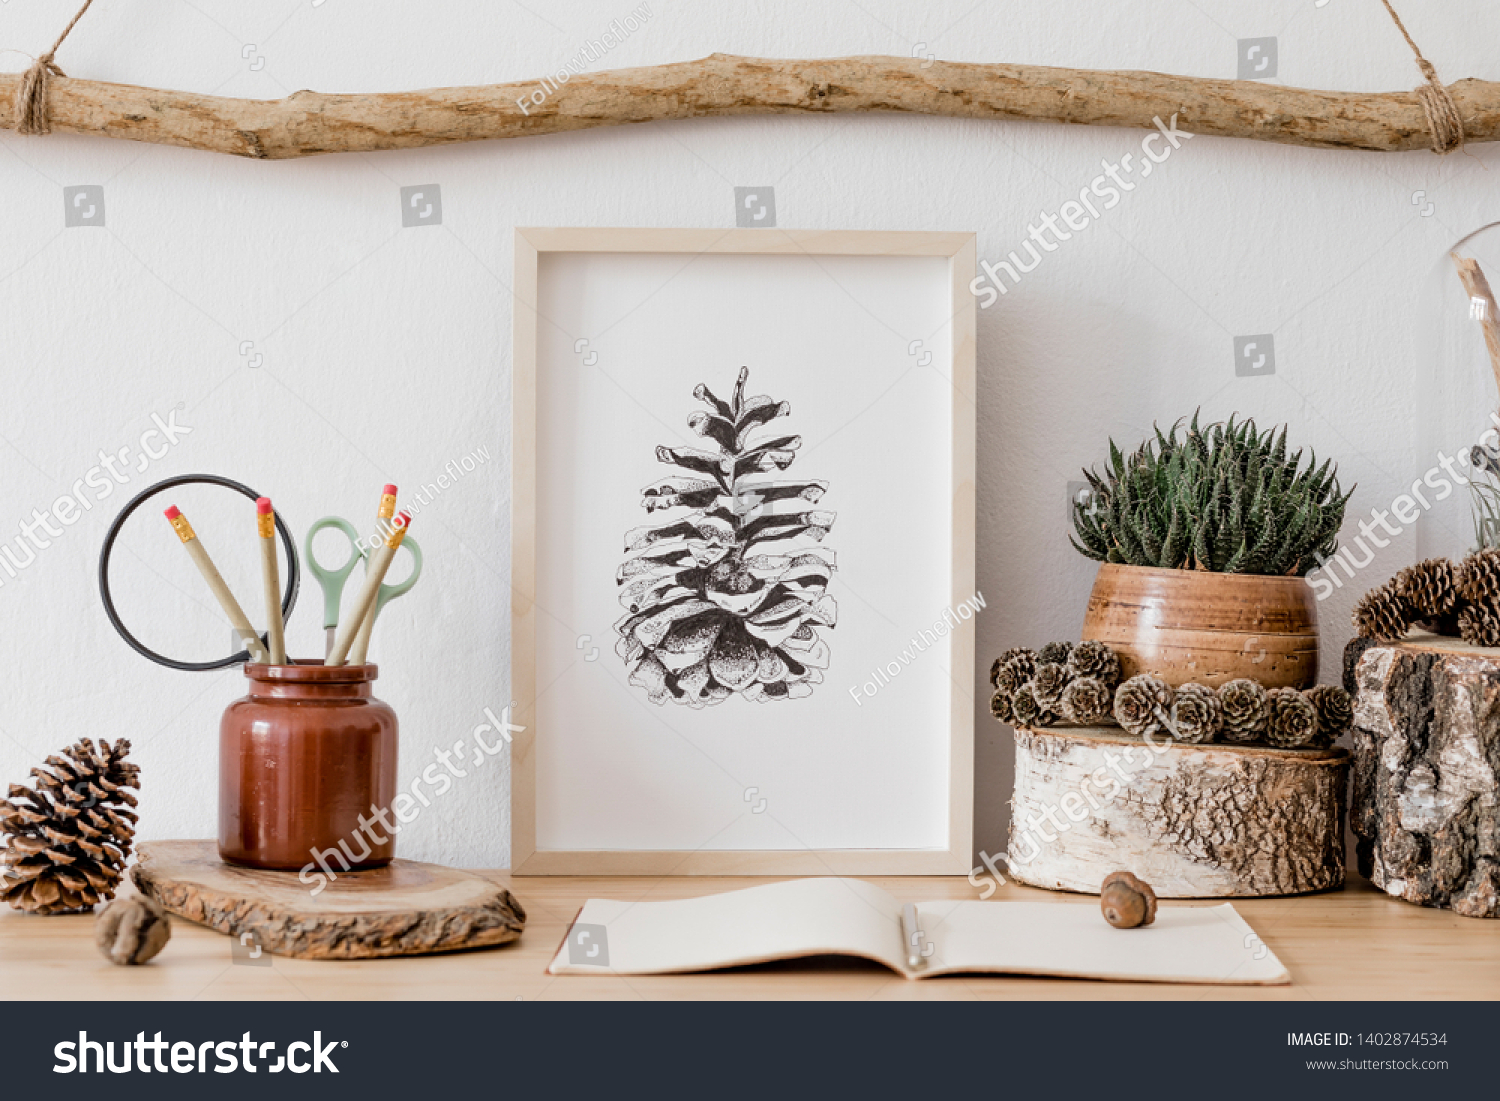 Stylish and scandinavian interior of living room with mock up poster frame, wooden accessories, succulents, forest cones, plants, notes and personal stuff. Minimalistic and botanical home decor.  #1402874534